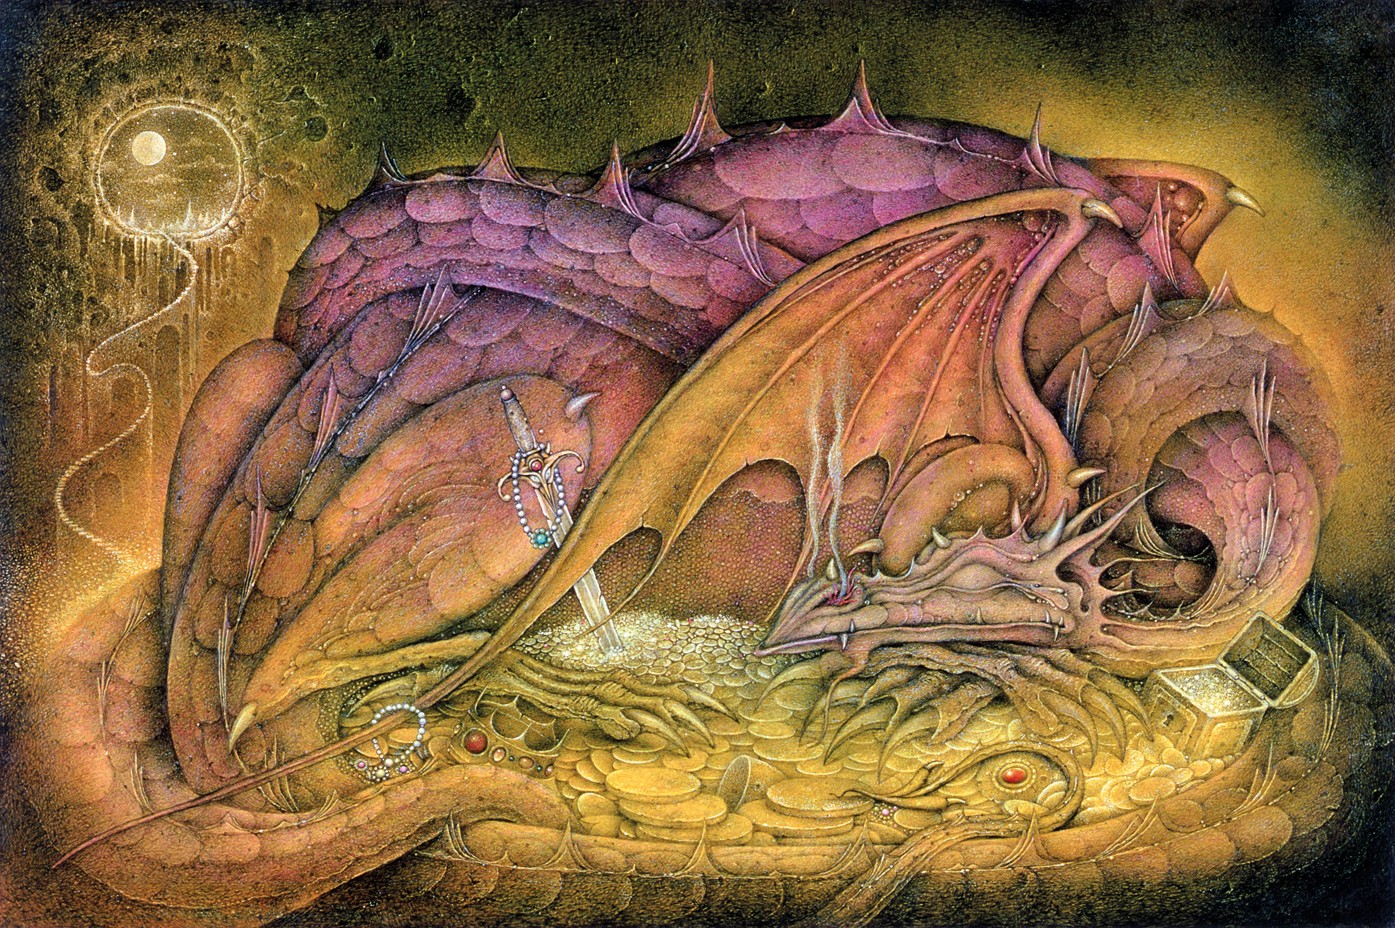 Merging myth with science: The enduring appeal of dragons across